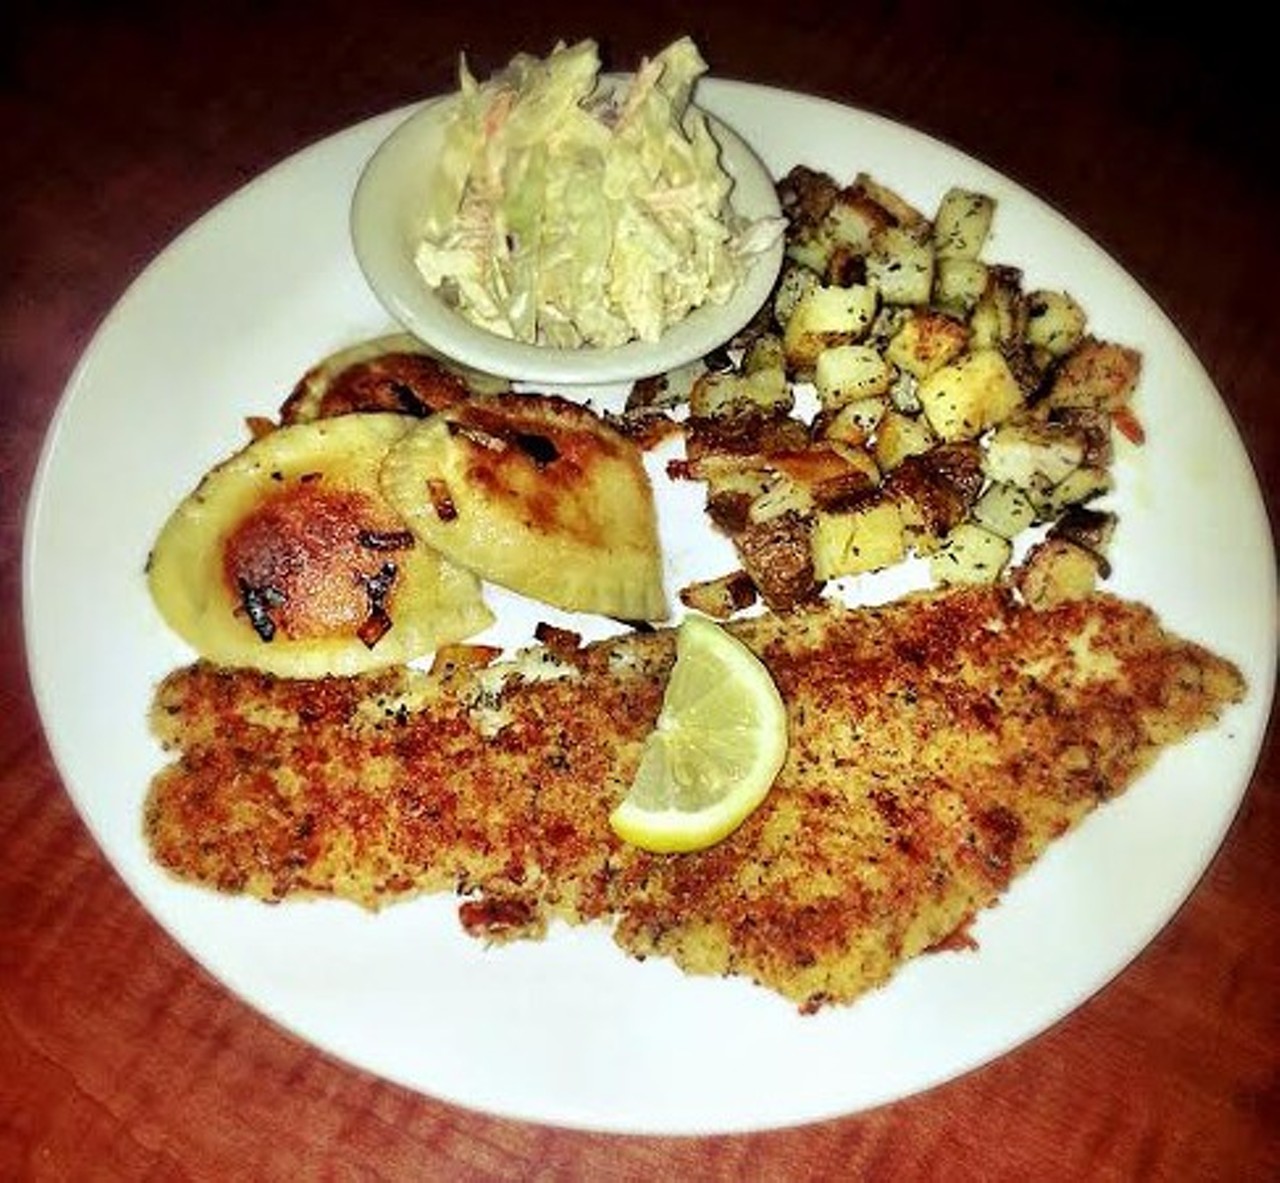 Grumpy's Cafe - The Anti-Fish Fry: no fryers needed here. Grumpy's serves up a lightly breaded and grilled haddock along with herb roasted potatoes, and Southwest slaw. Add pierogies for $2 more. Served every Friday through Lent. Stop in at 2621 W 14th St.